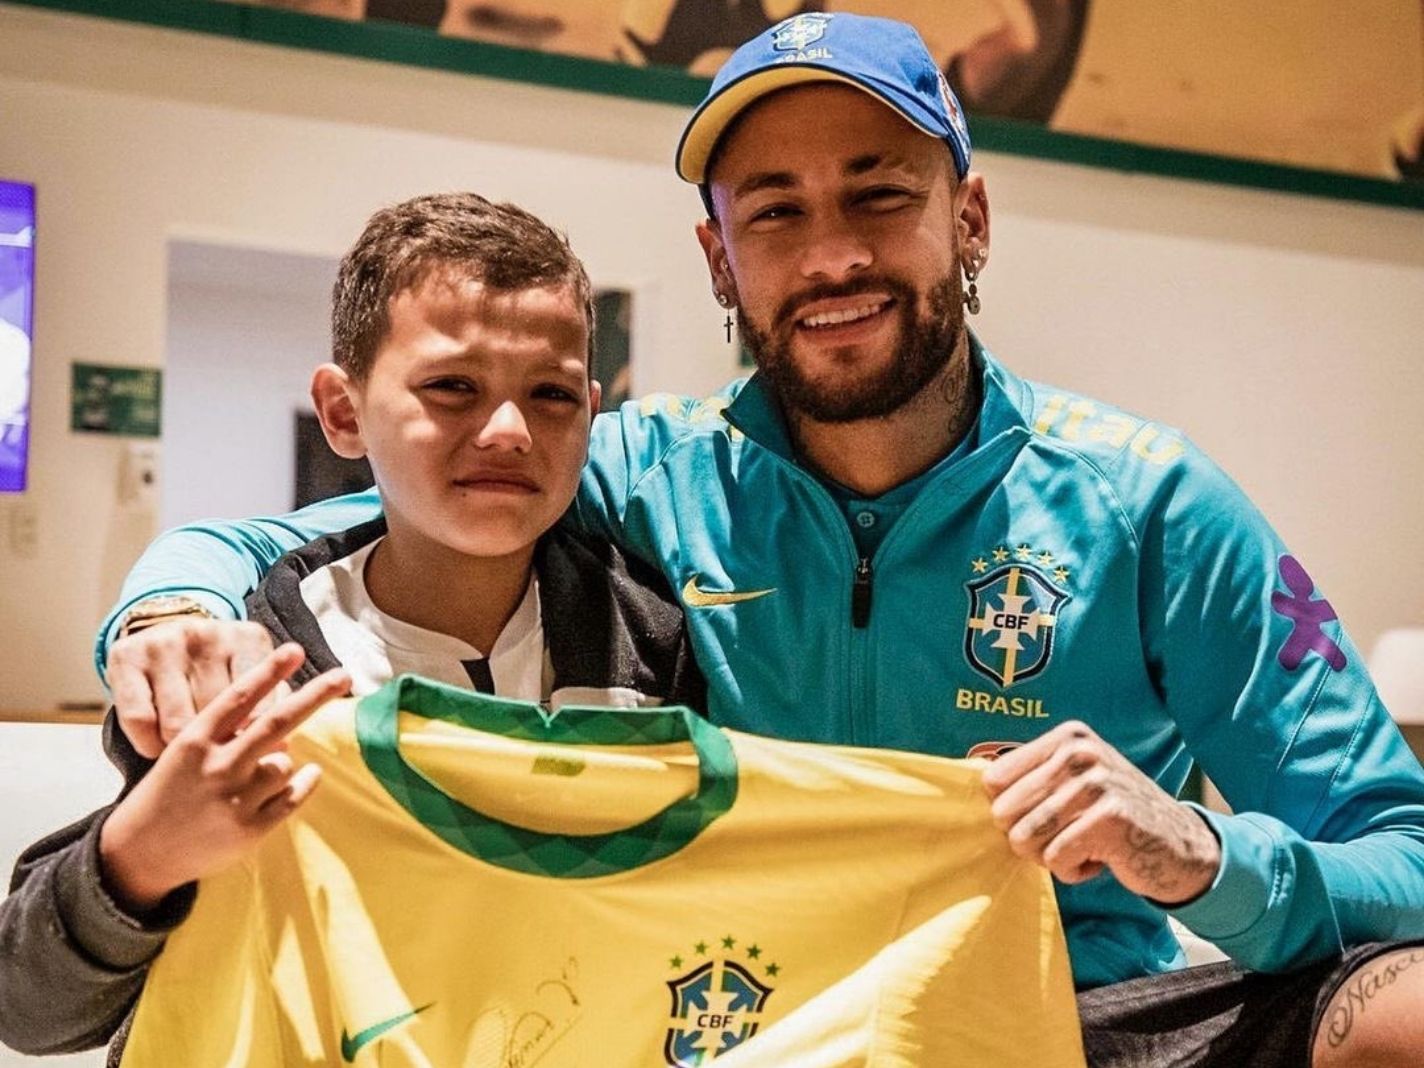 9-year-old Santos player who was bullied online finds support from Neymar